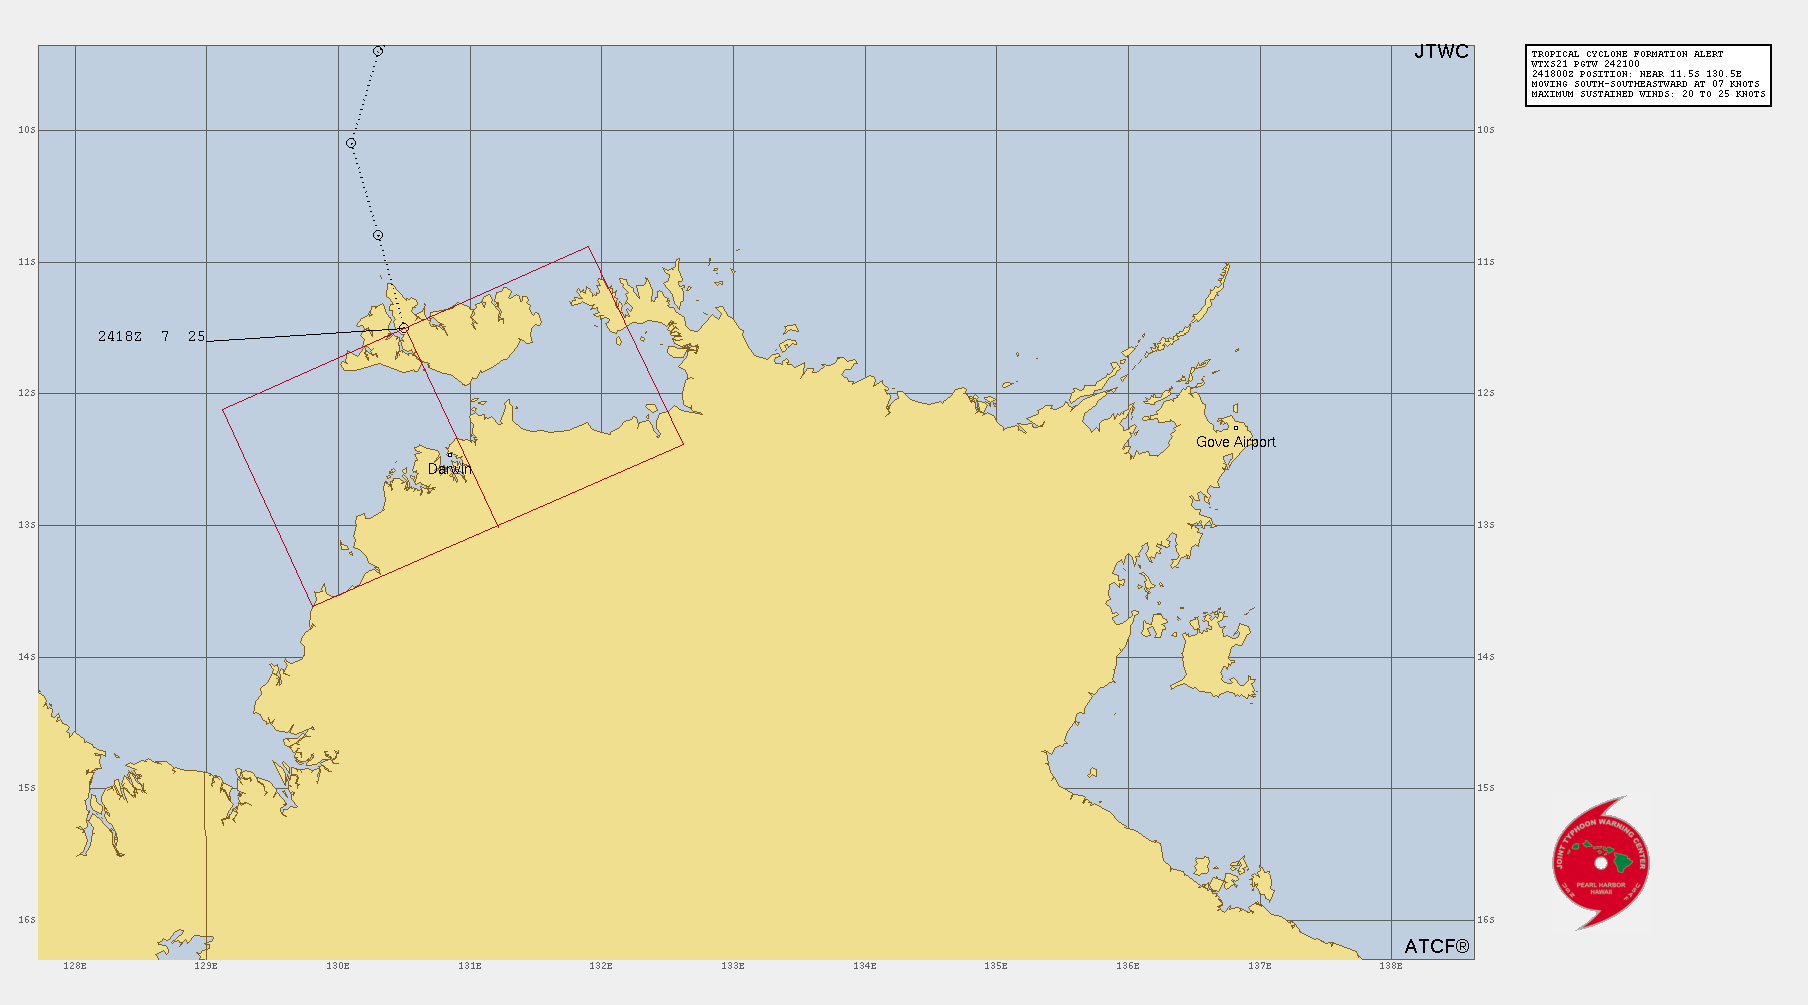 Invest 97S: Tropical Cyclone Formation Alert North of Darwin, 24/2130utc